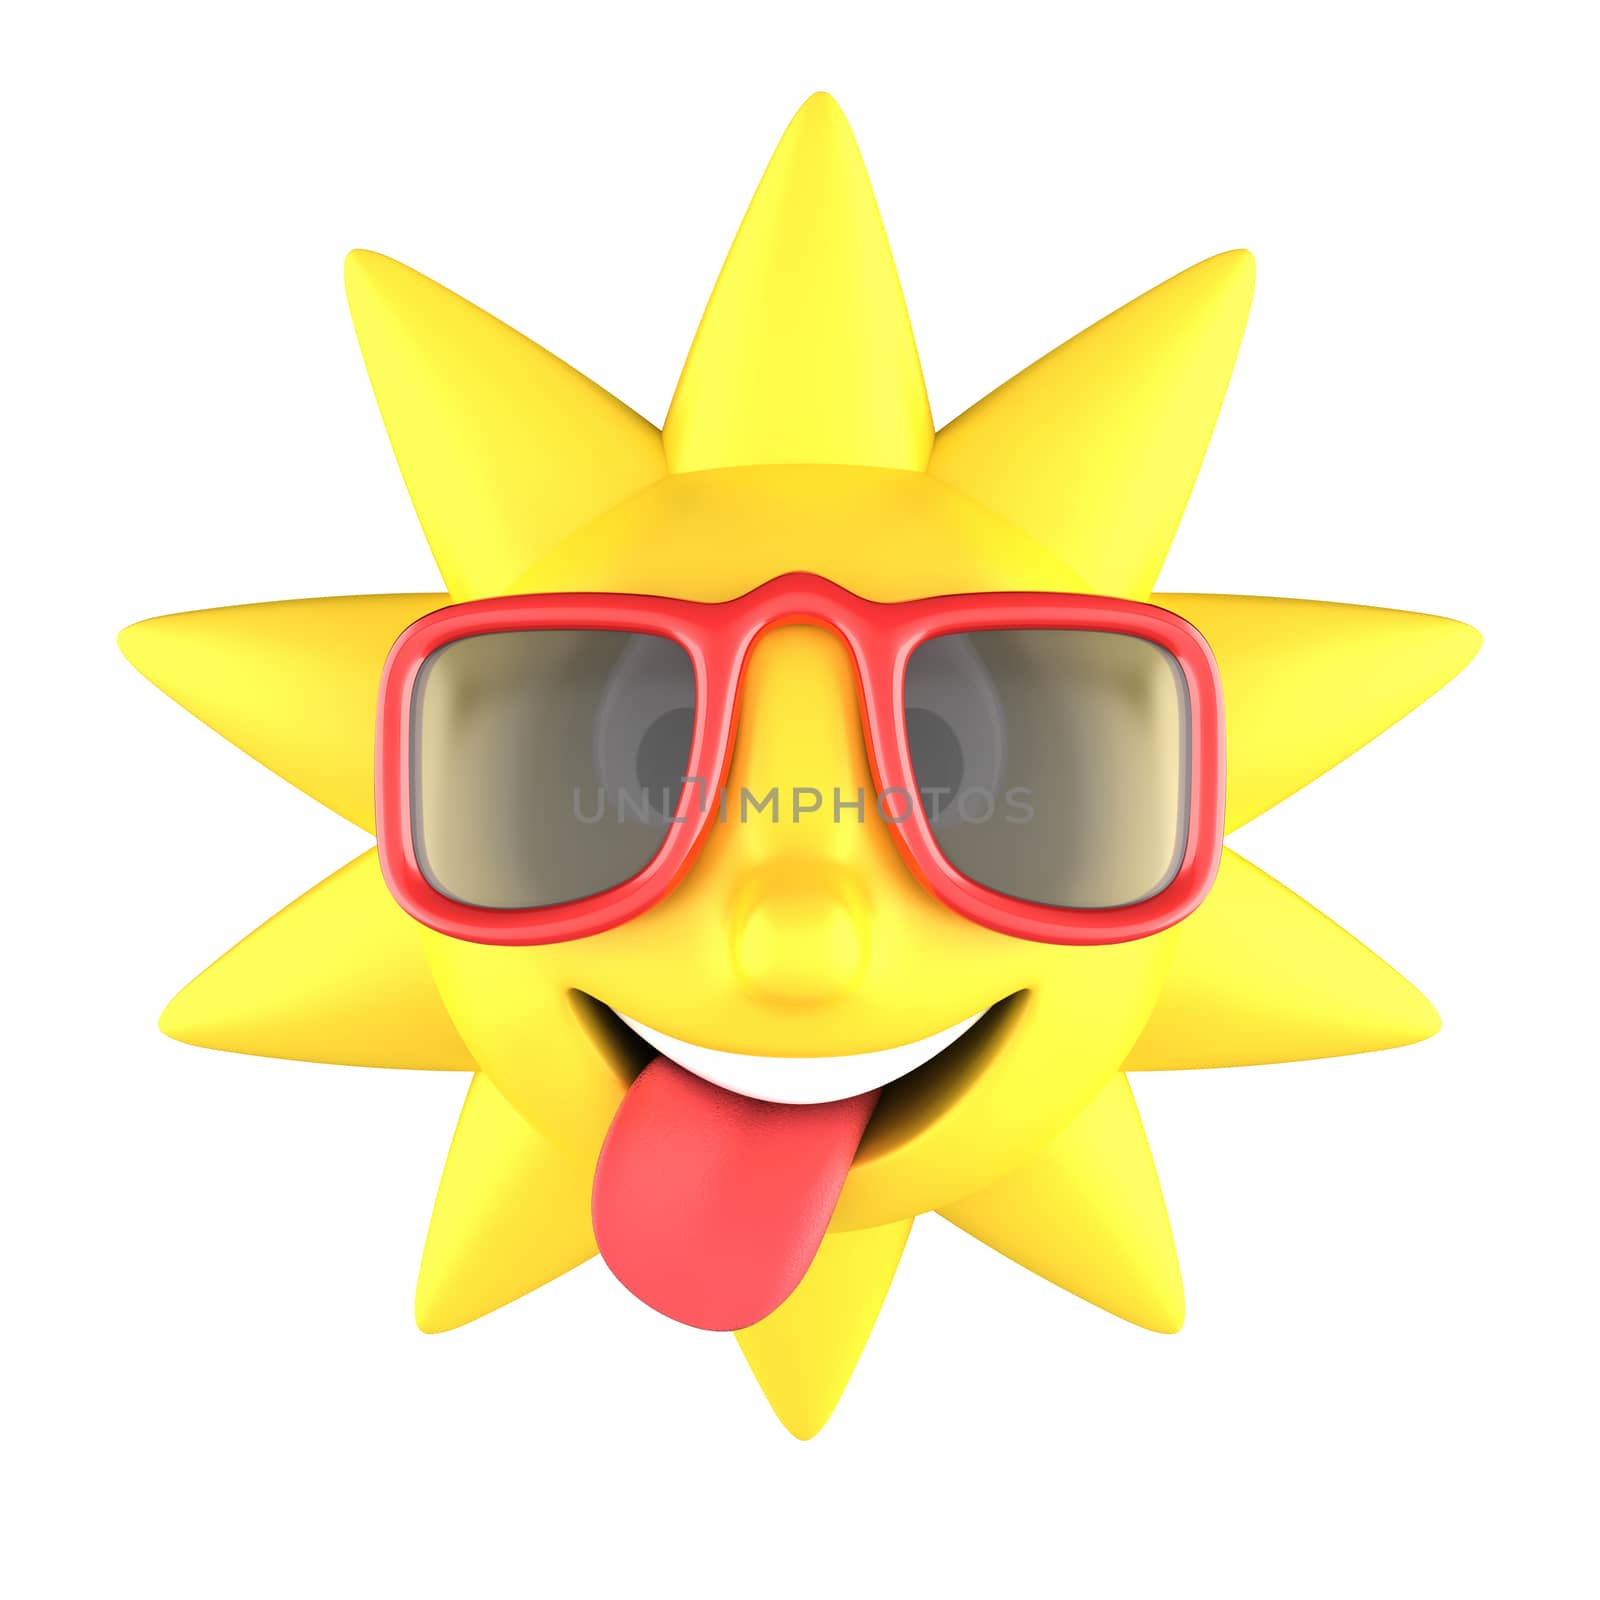 Sun with sunglasses smiling by Harvepino